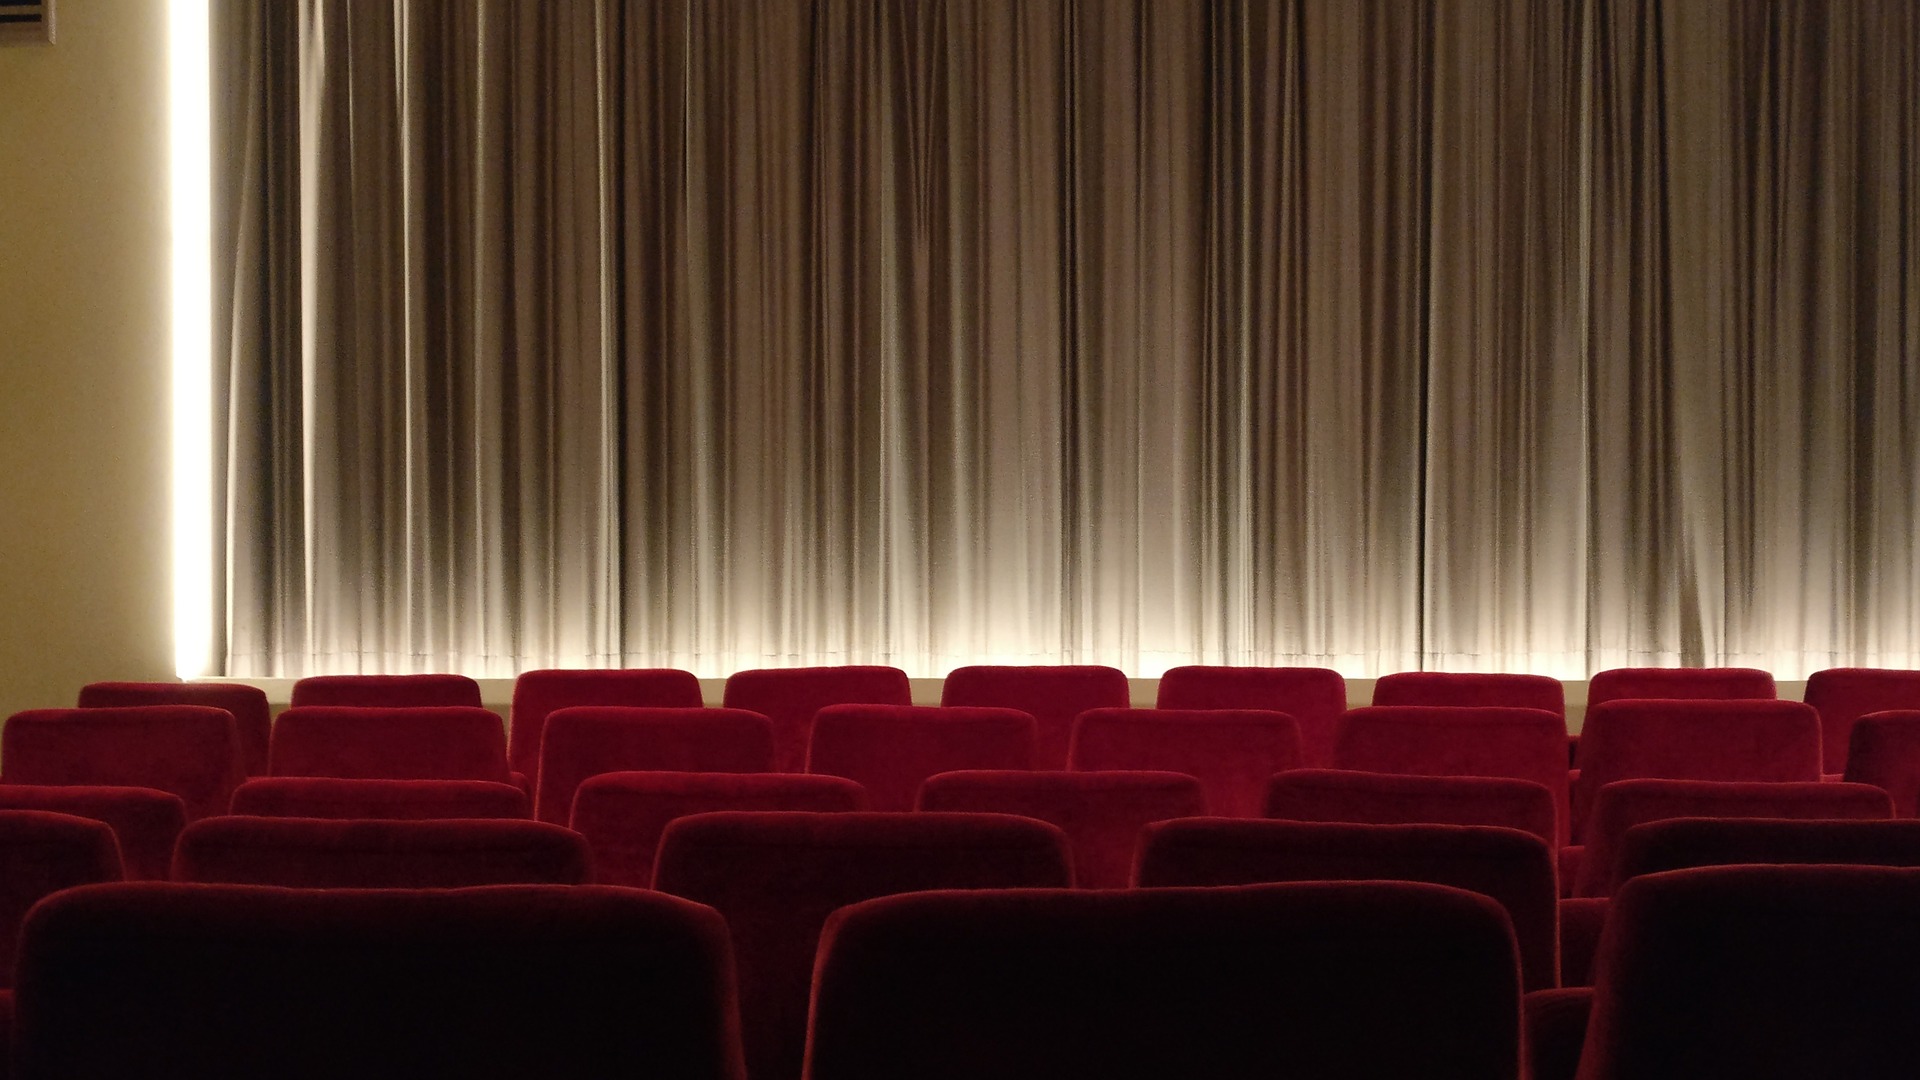 Red seats in rows in a cinema facing the curtains